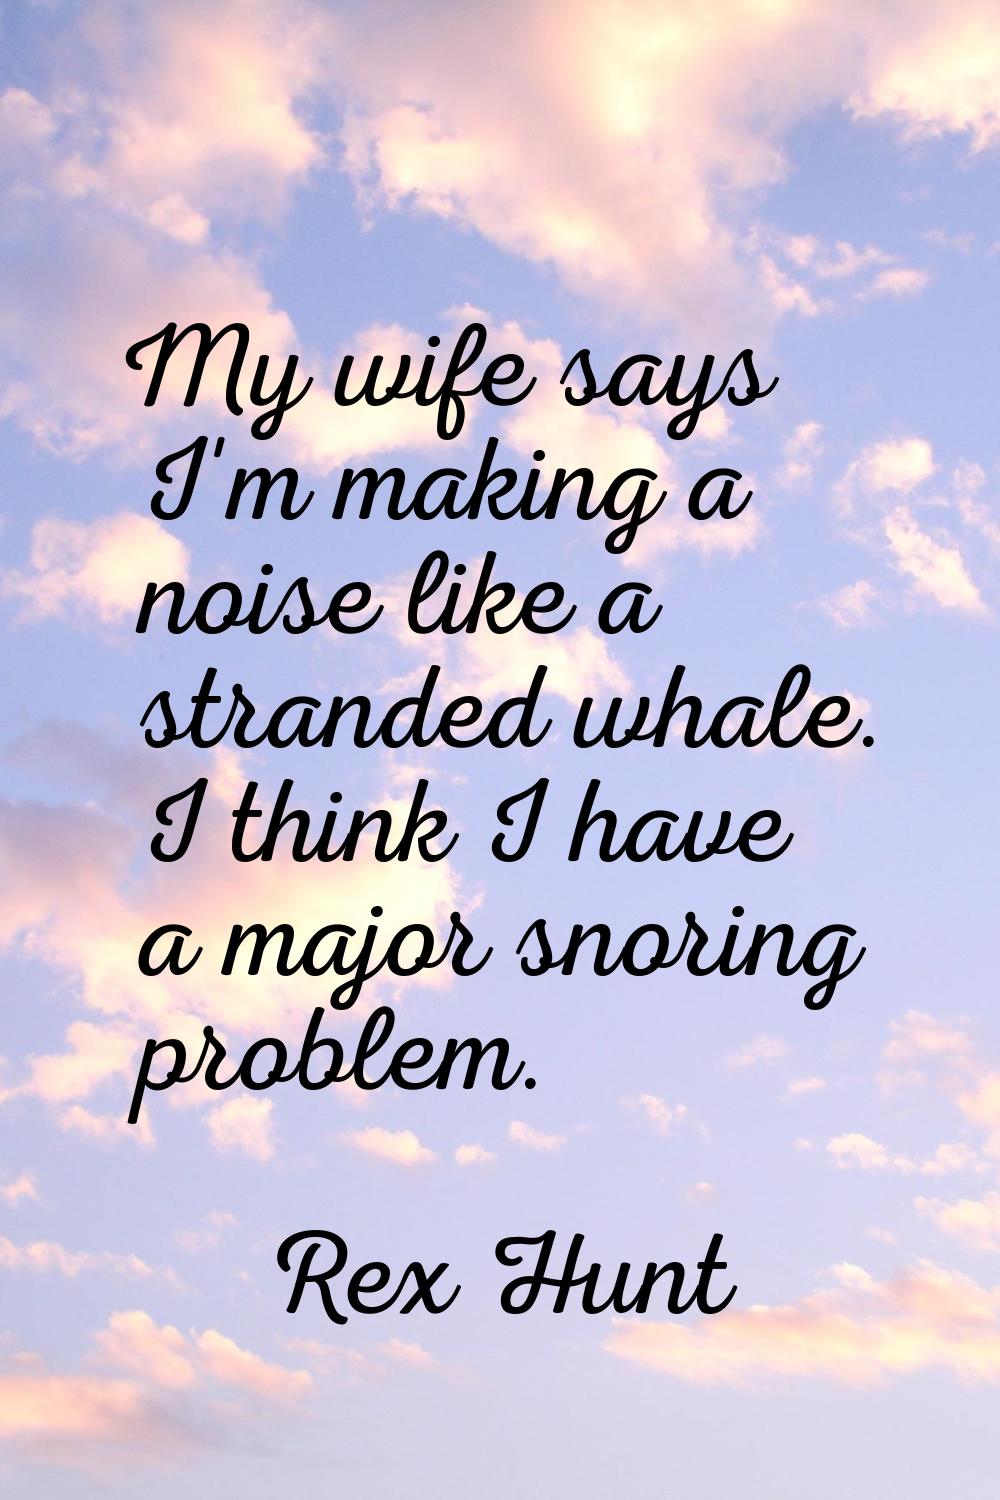 My wife says I'm making a noise like a stranded whale. I think I have a major snoring problem.